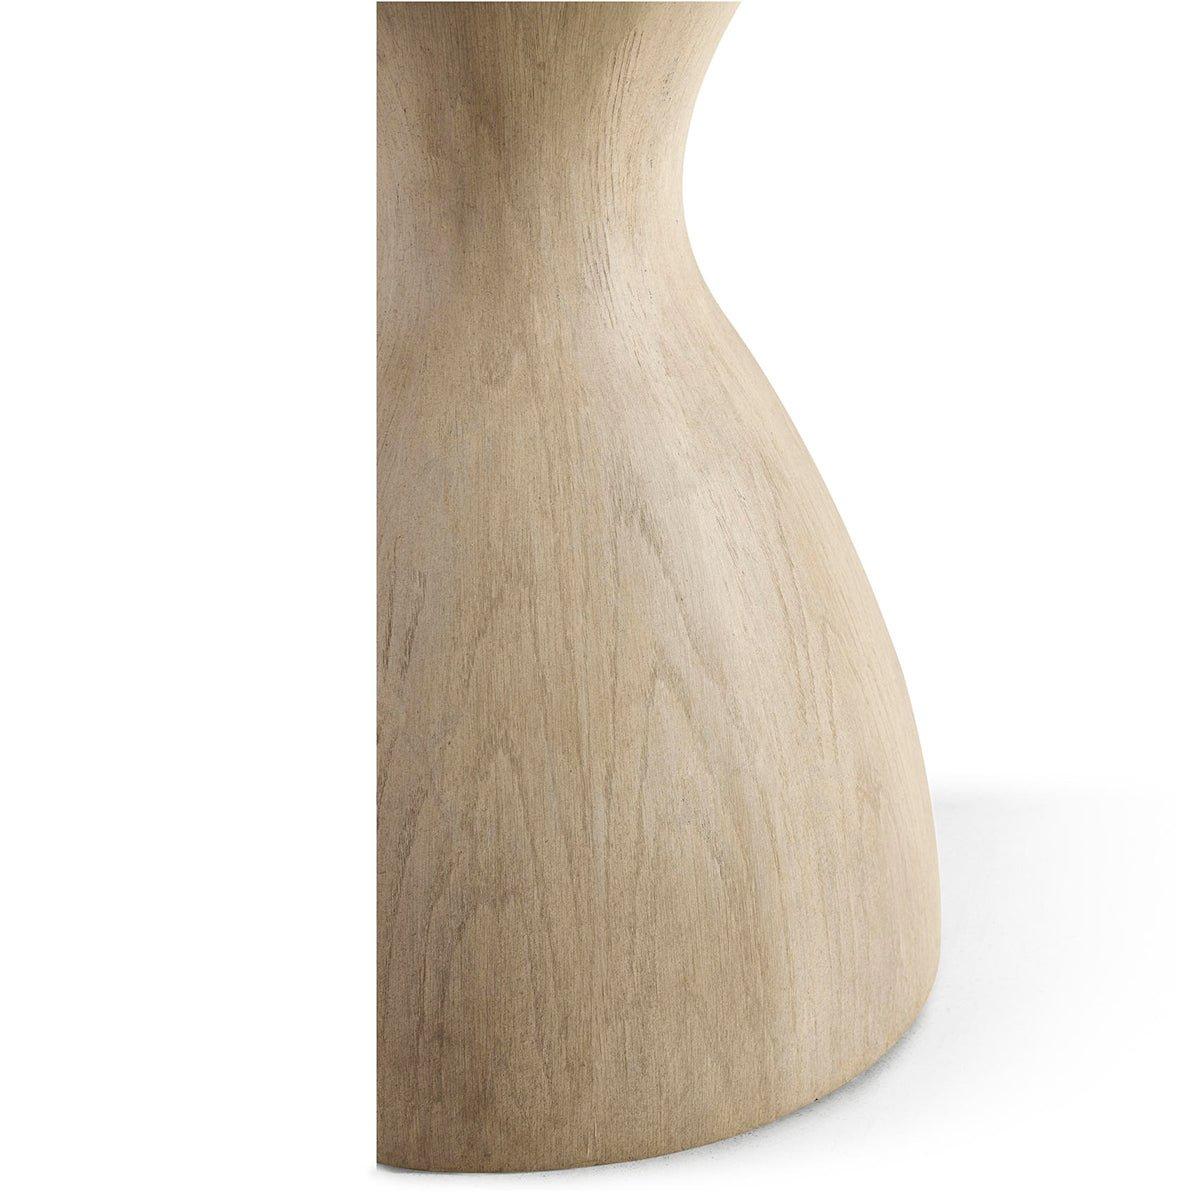 Contemporary Organic Modern Oak Pedestal Dining Table For Sale